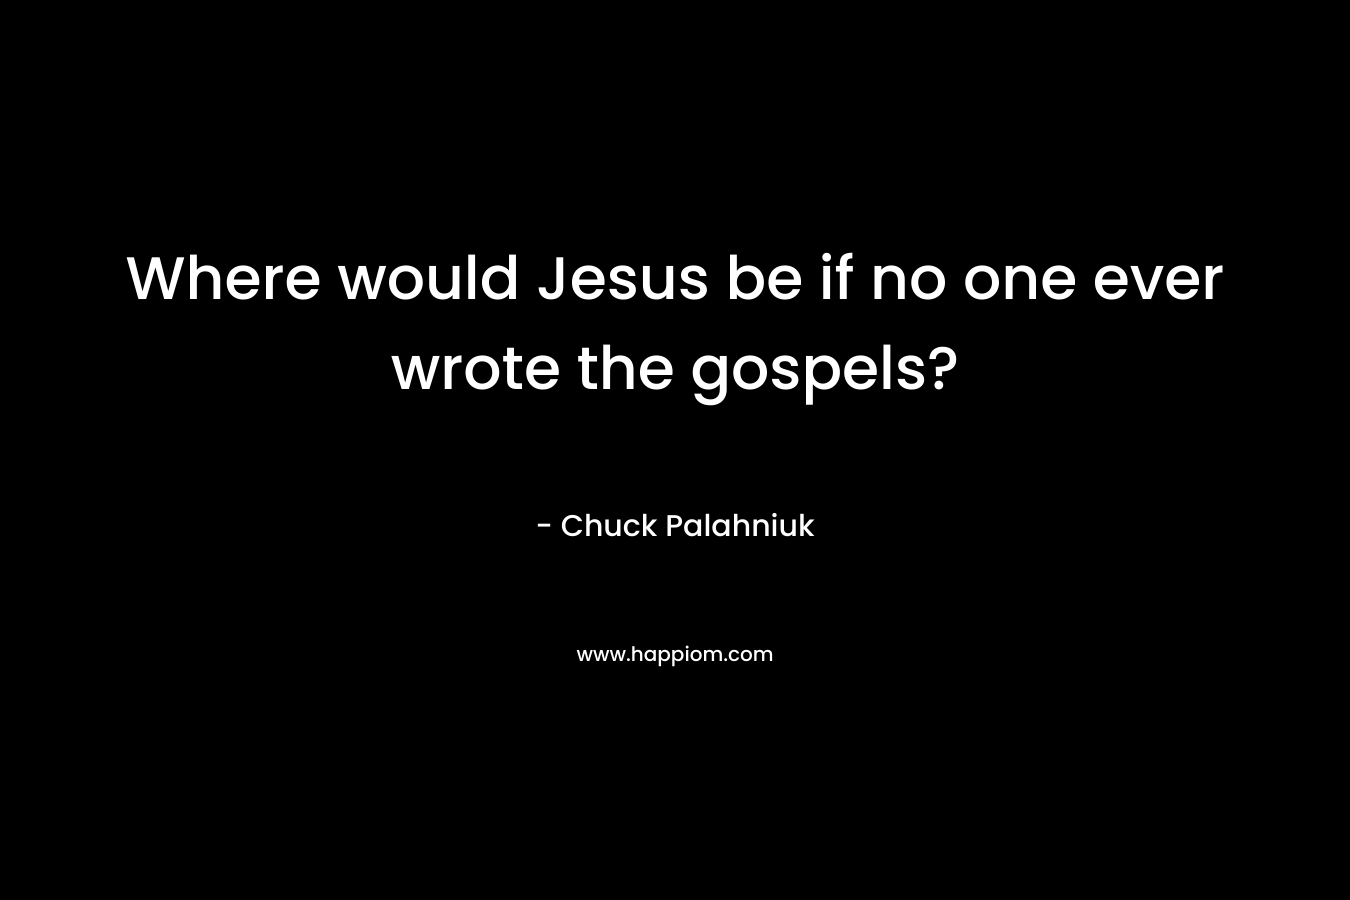 Where would Jesus be if no one ever wrote the gospels? – Chuck Palahniuk